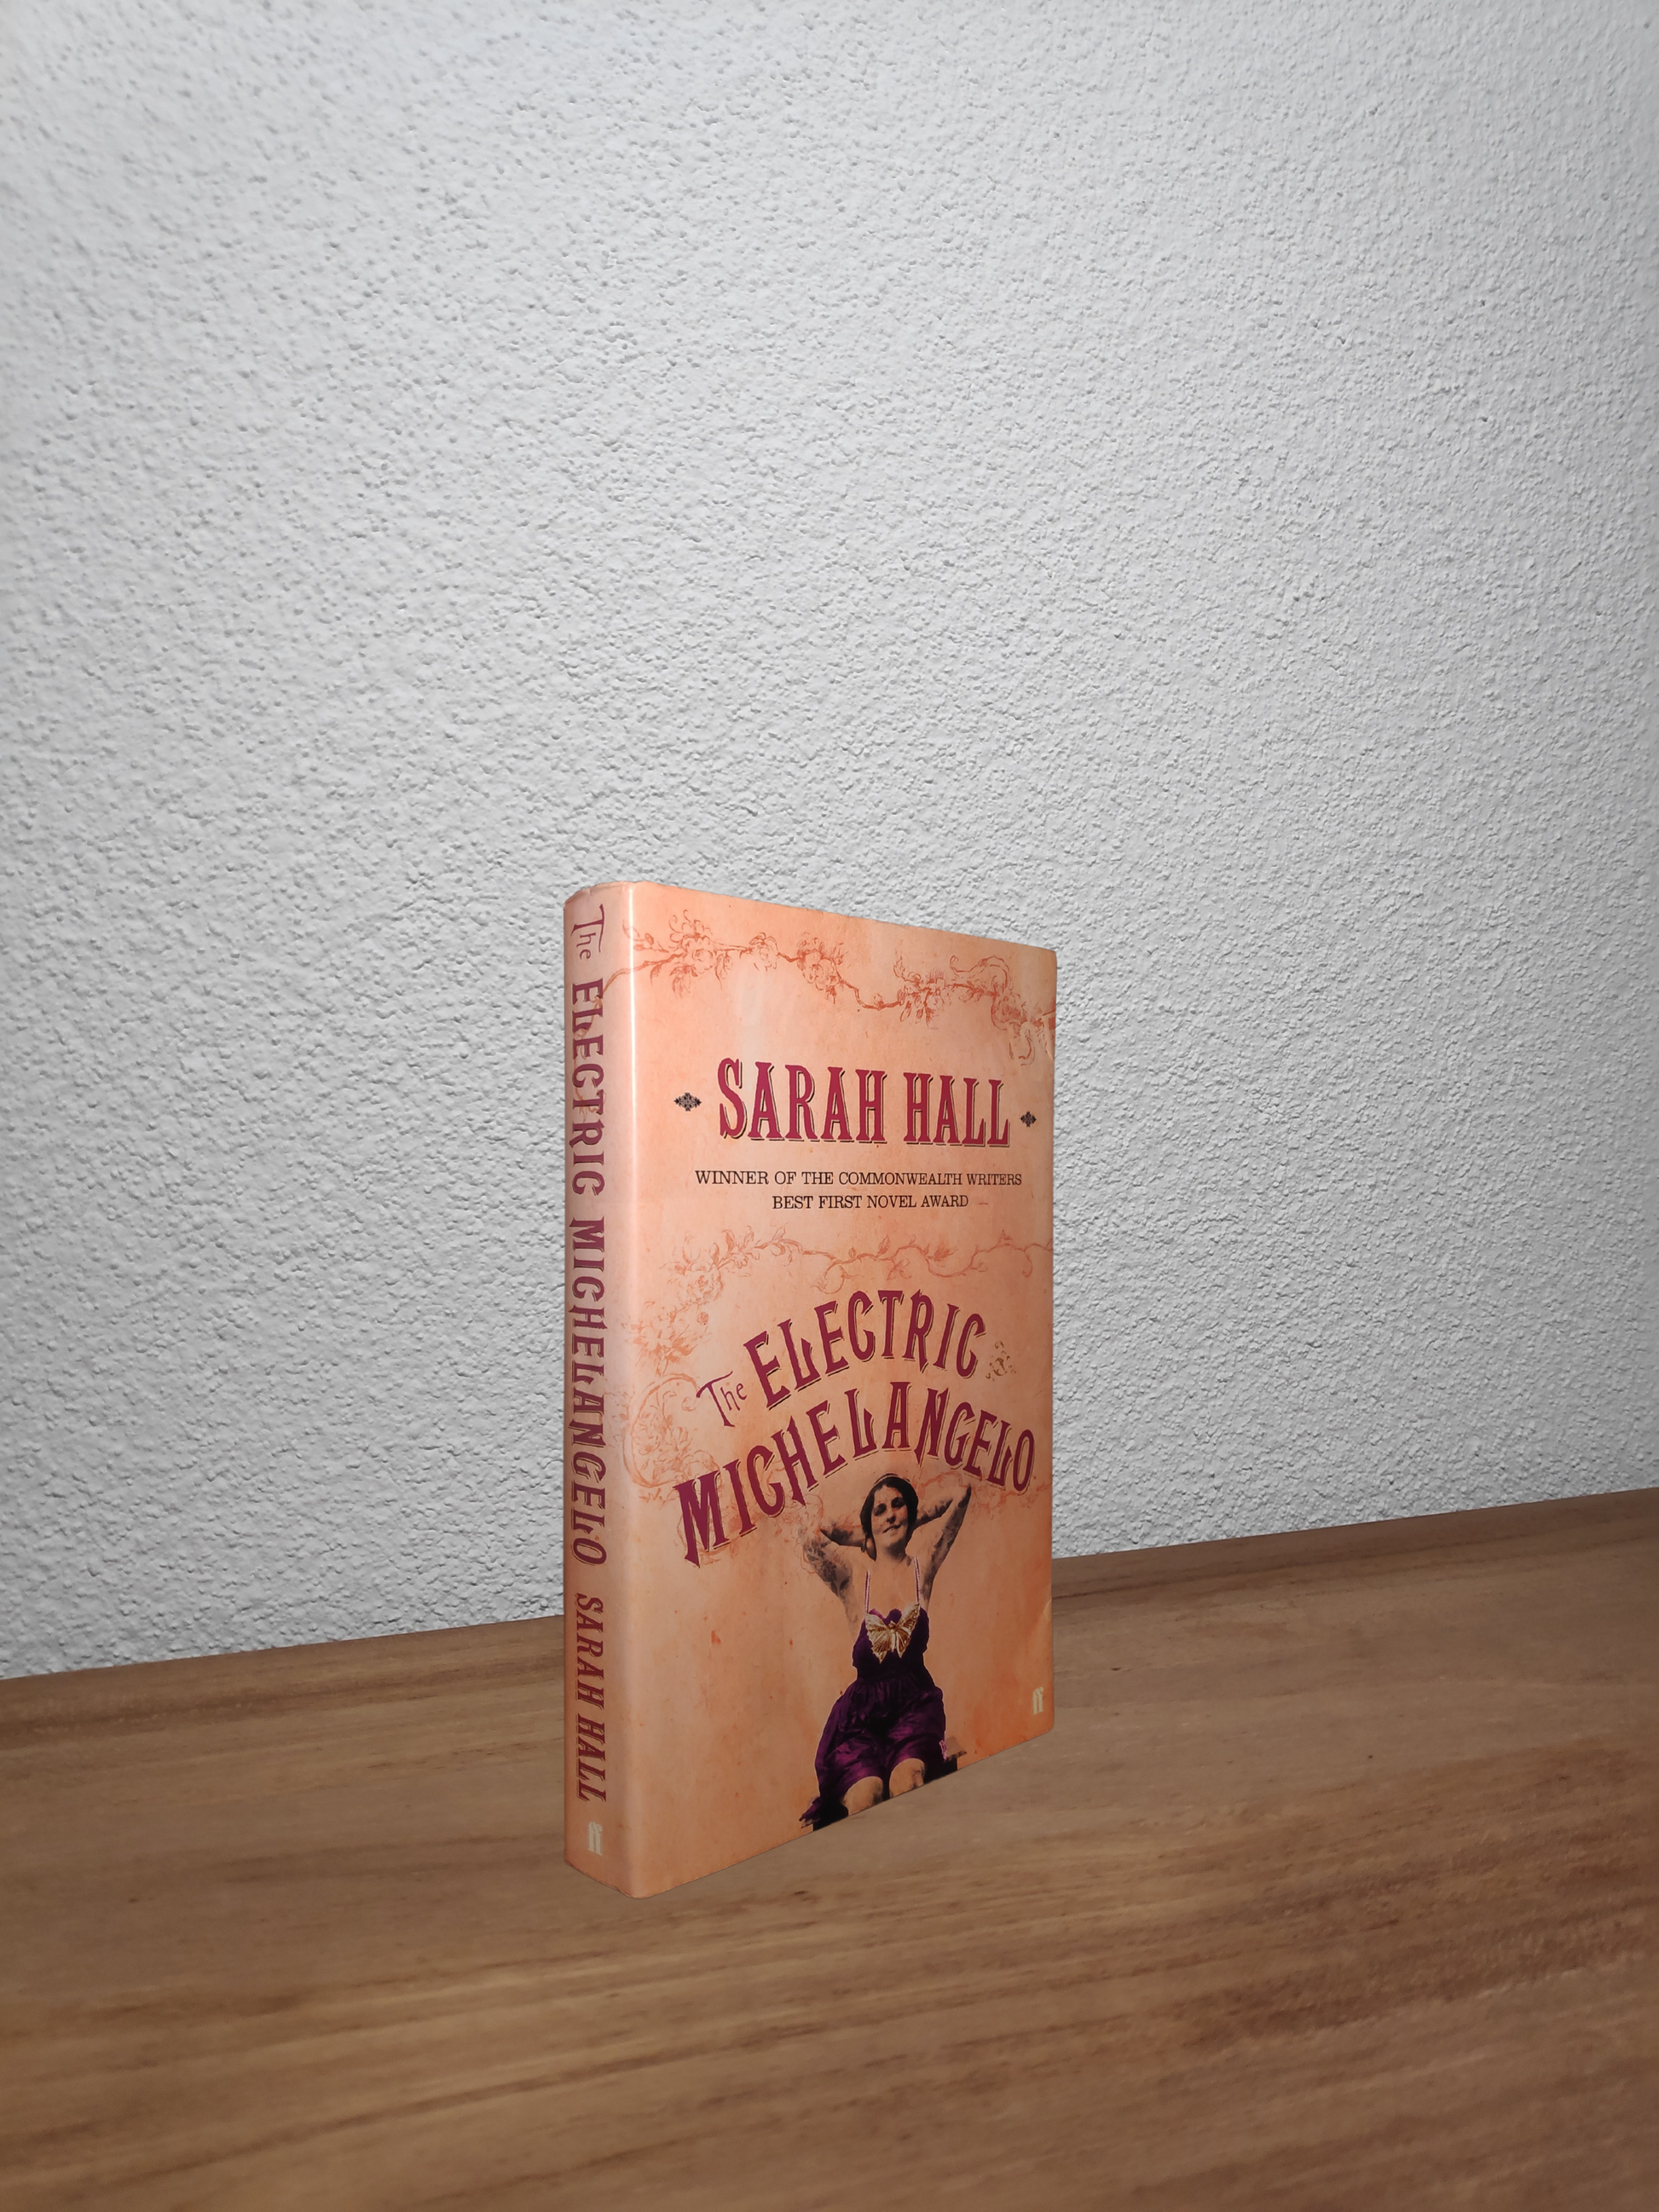 Sarah Hall - The Electric Michelangelo  - Second-hand english book to deliver in Zurich & Switzerland